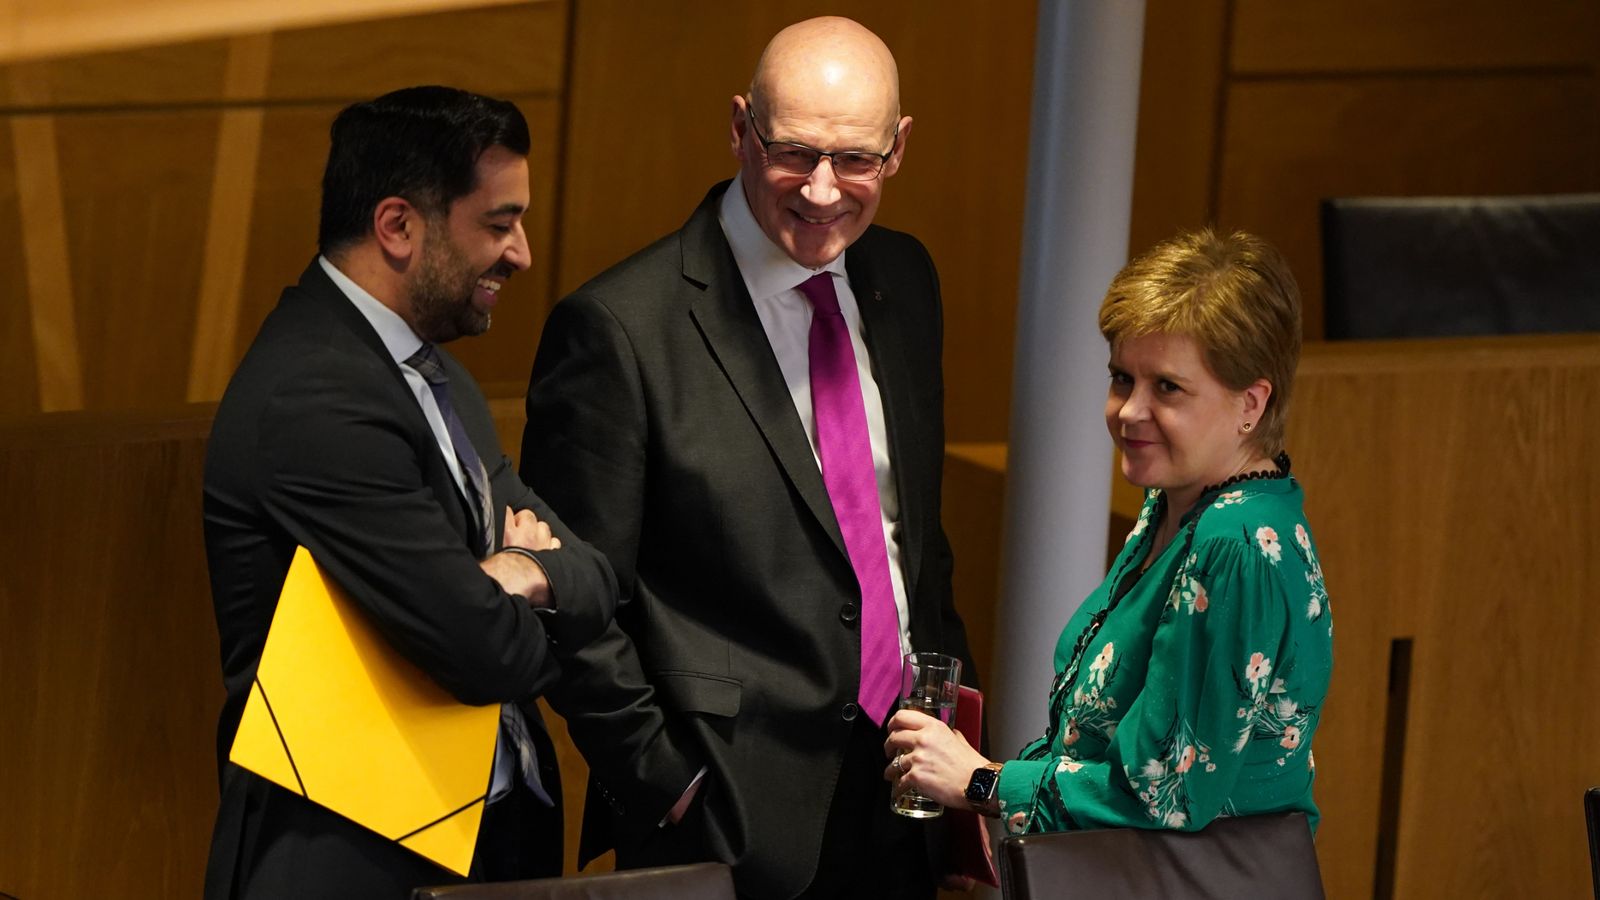 scotland's new first minister sworn in